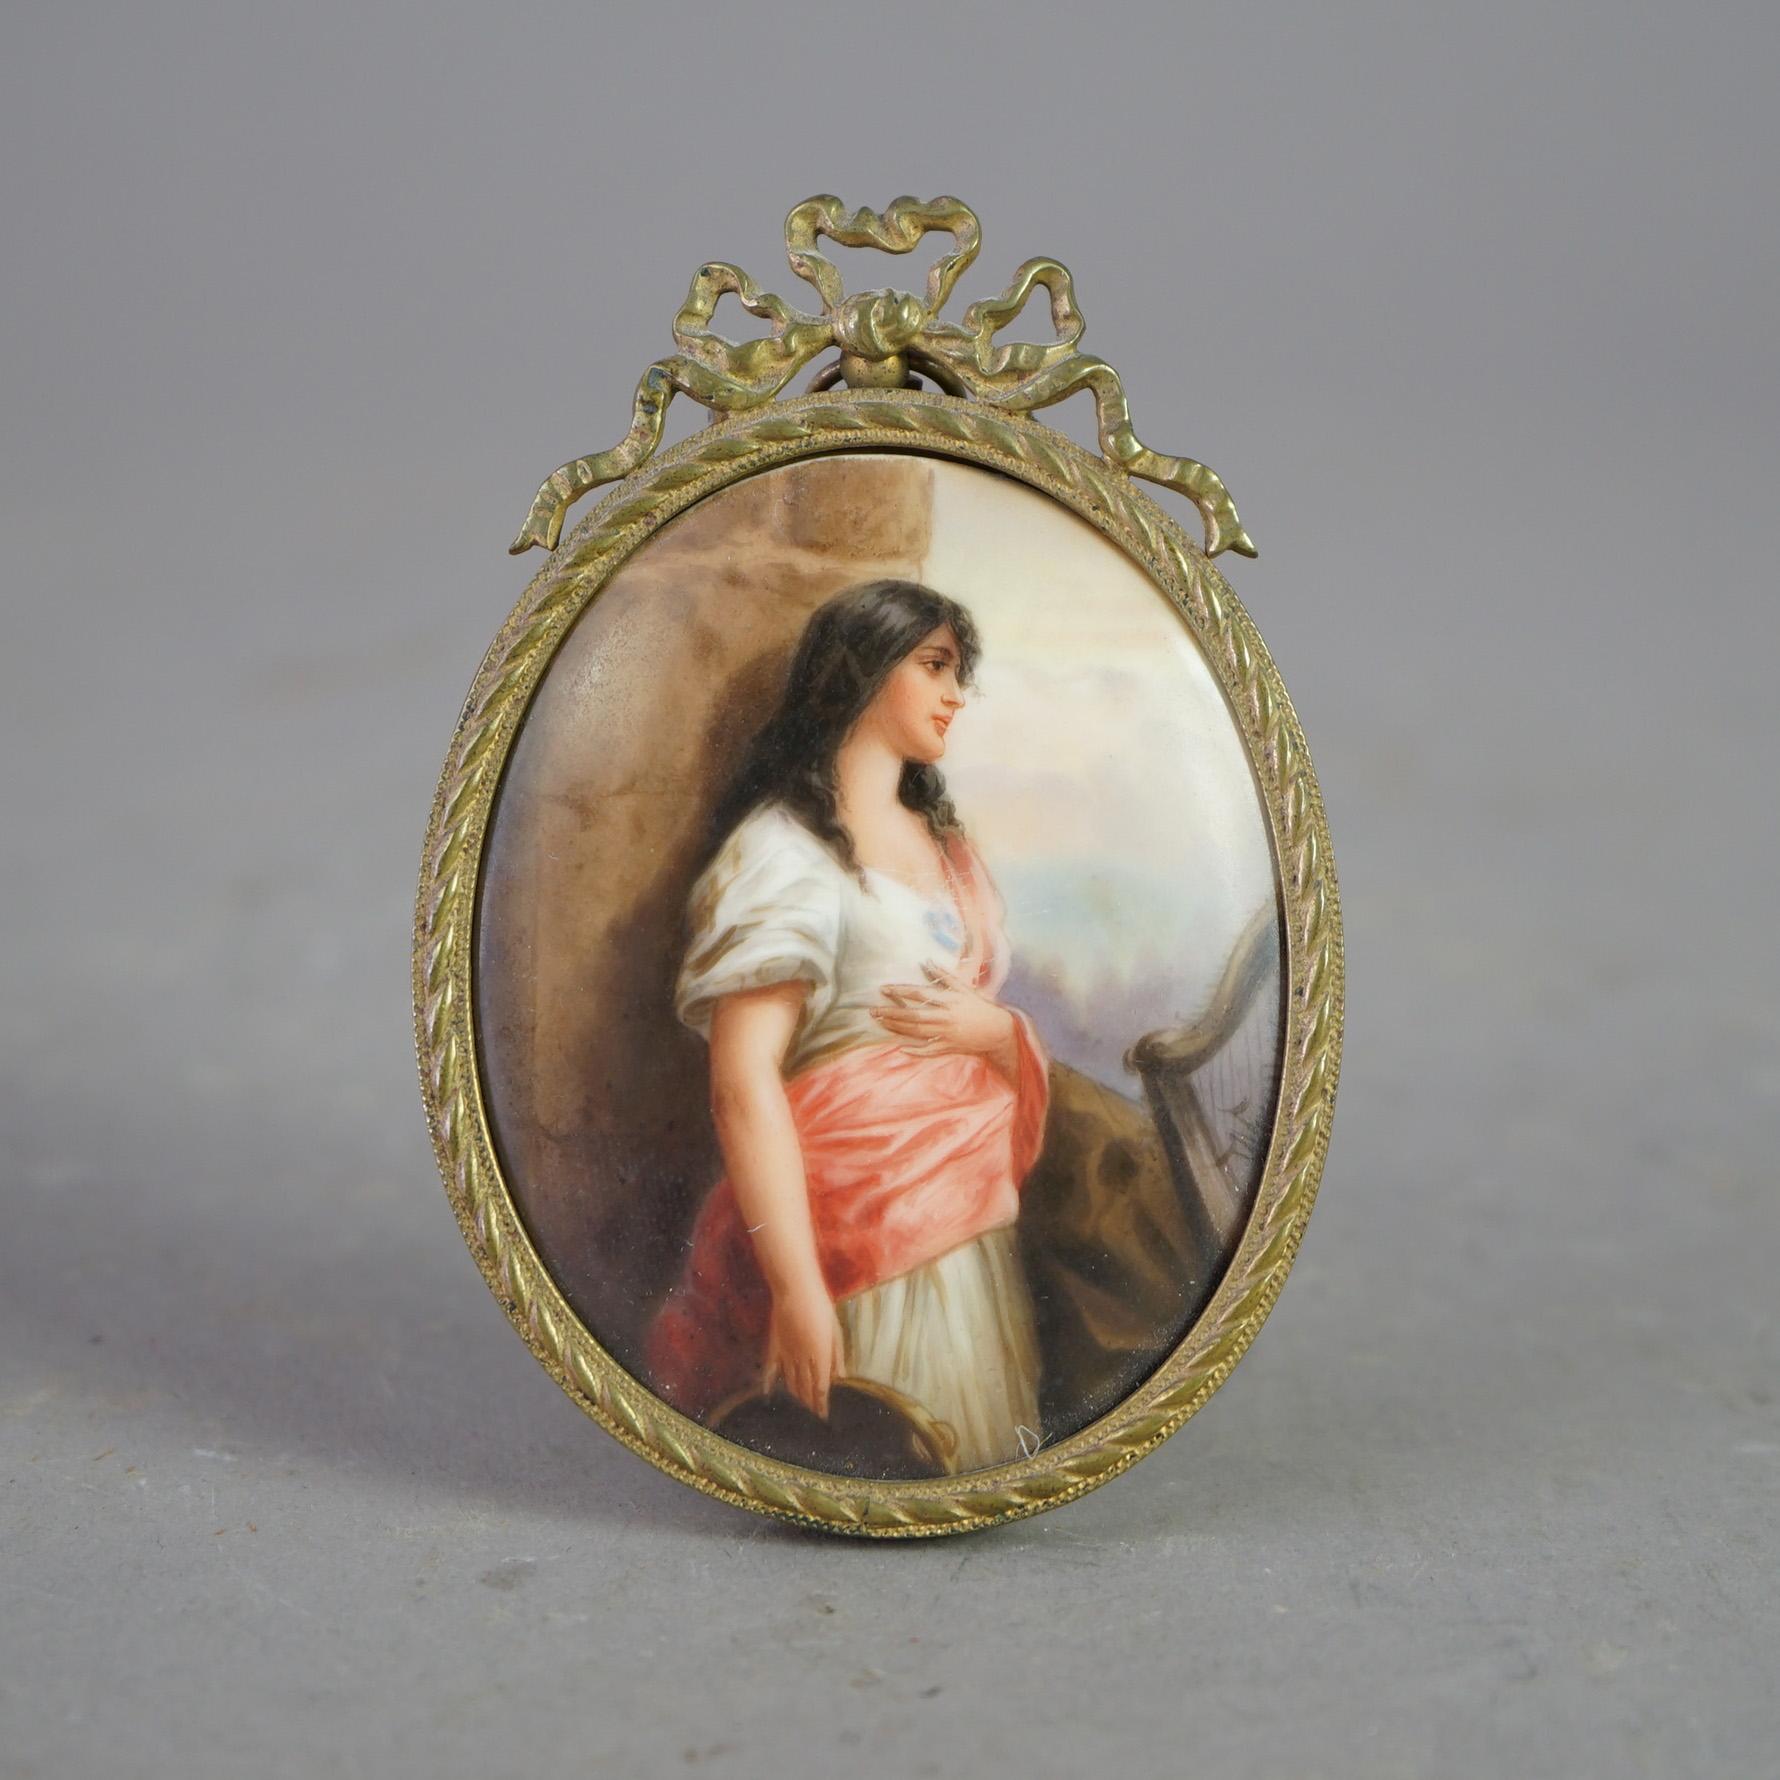 An antique hand painted porcelain plaque depicts the portrait of a young woman, seated in cast brass ribbon-form frame, 19th century

Measures - 4